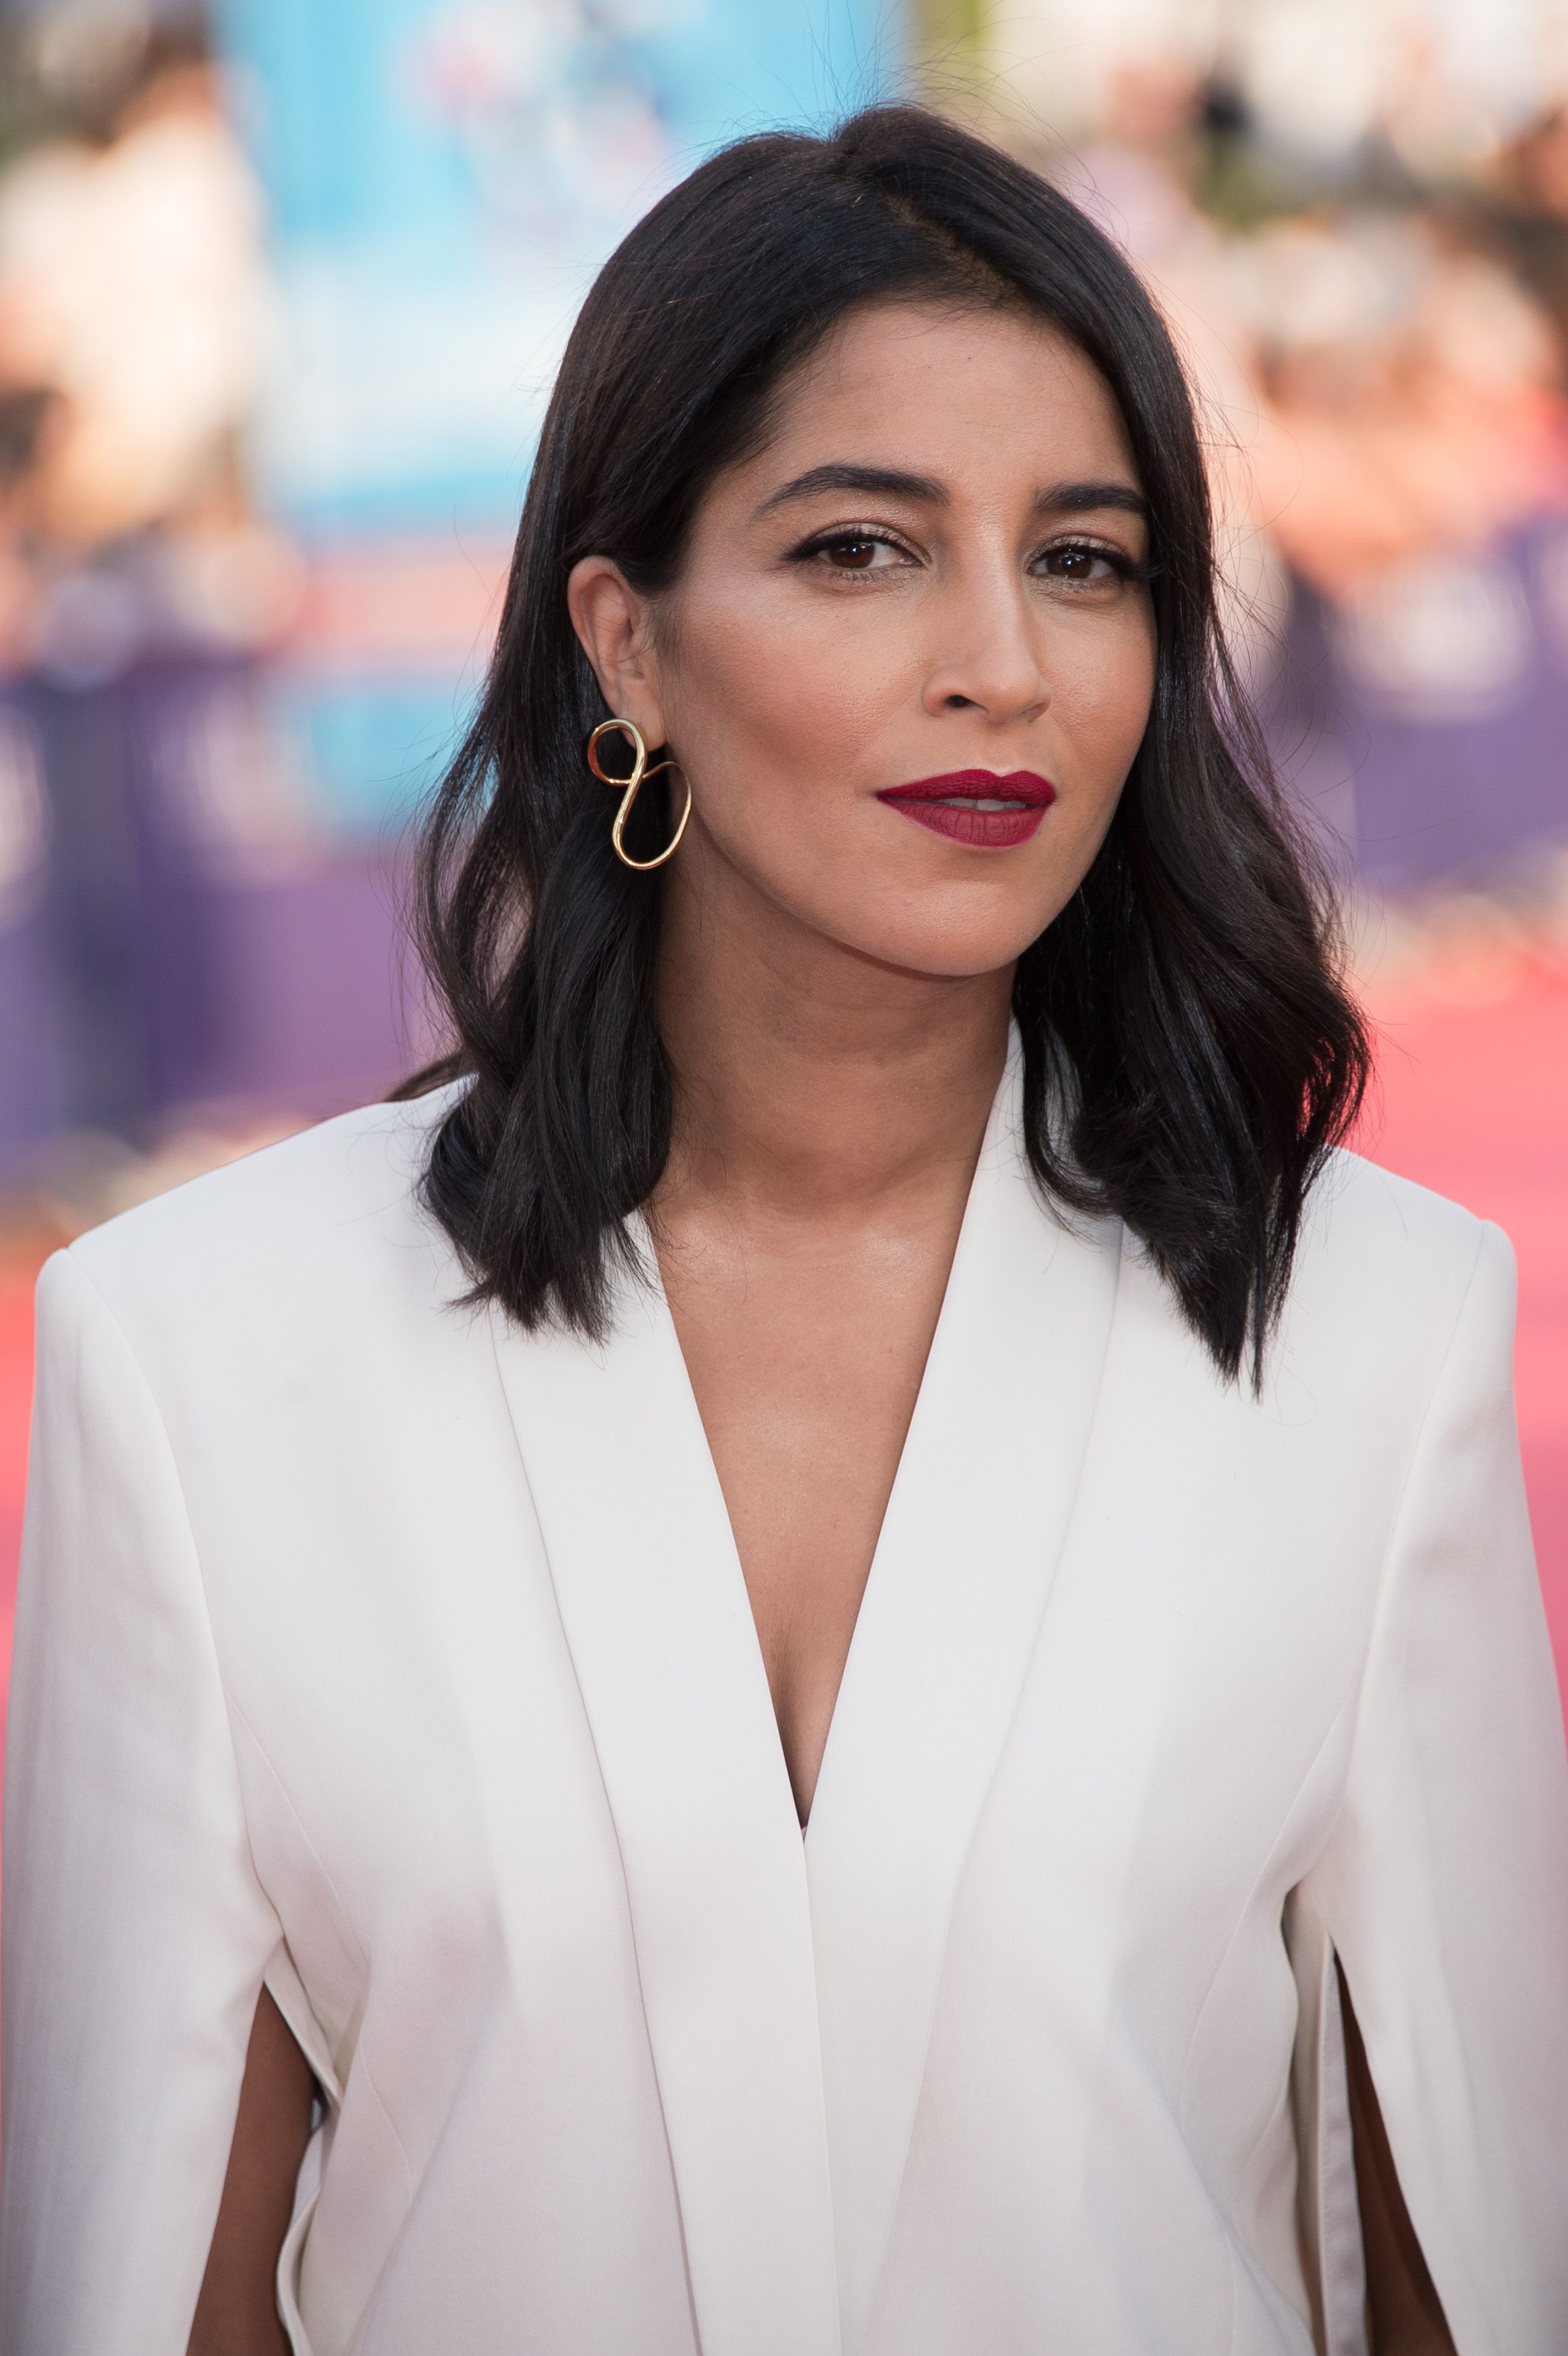 L'actrice Leila Bekhti | Photo : Getty Images.